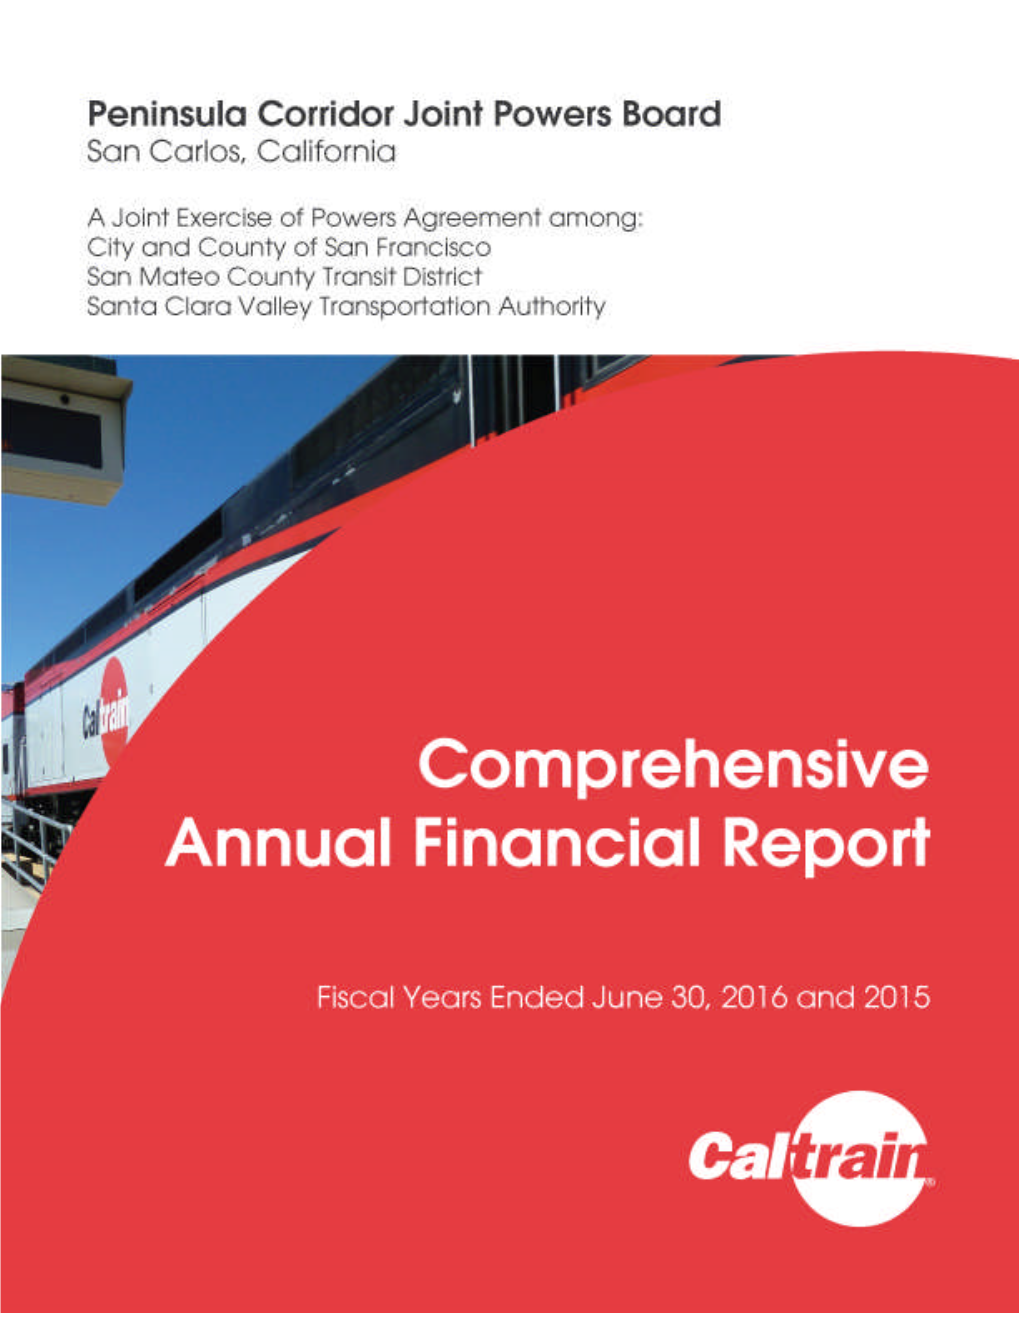 For the Fiscal Year Ended June 30, 2016 with Comparisons to Prior Fiscal Years Ended June 30, 2014 and June 30, 2015